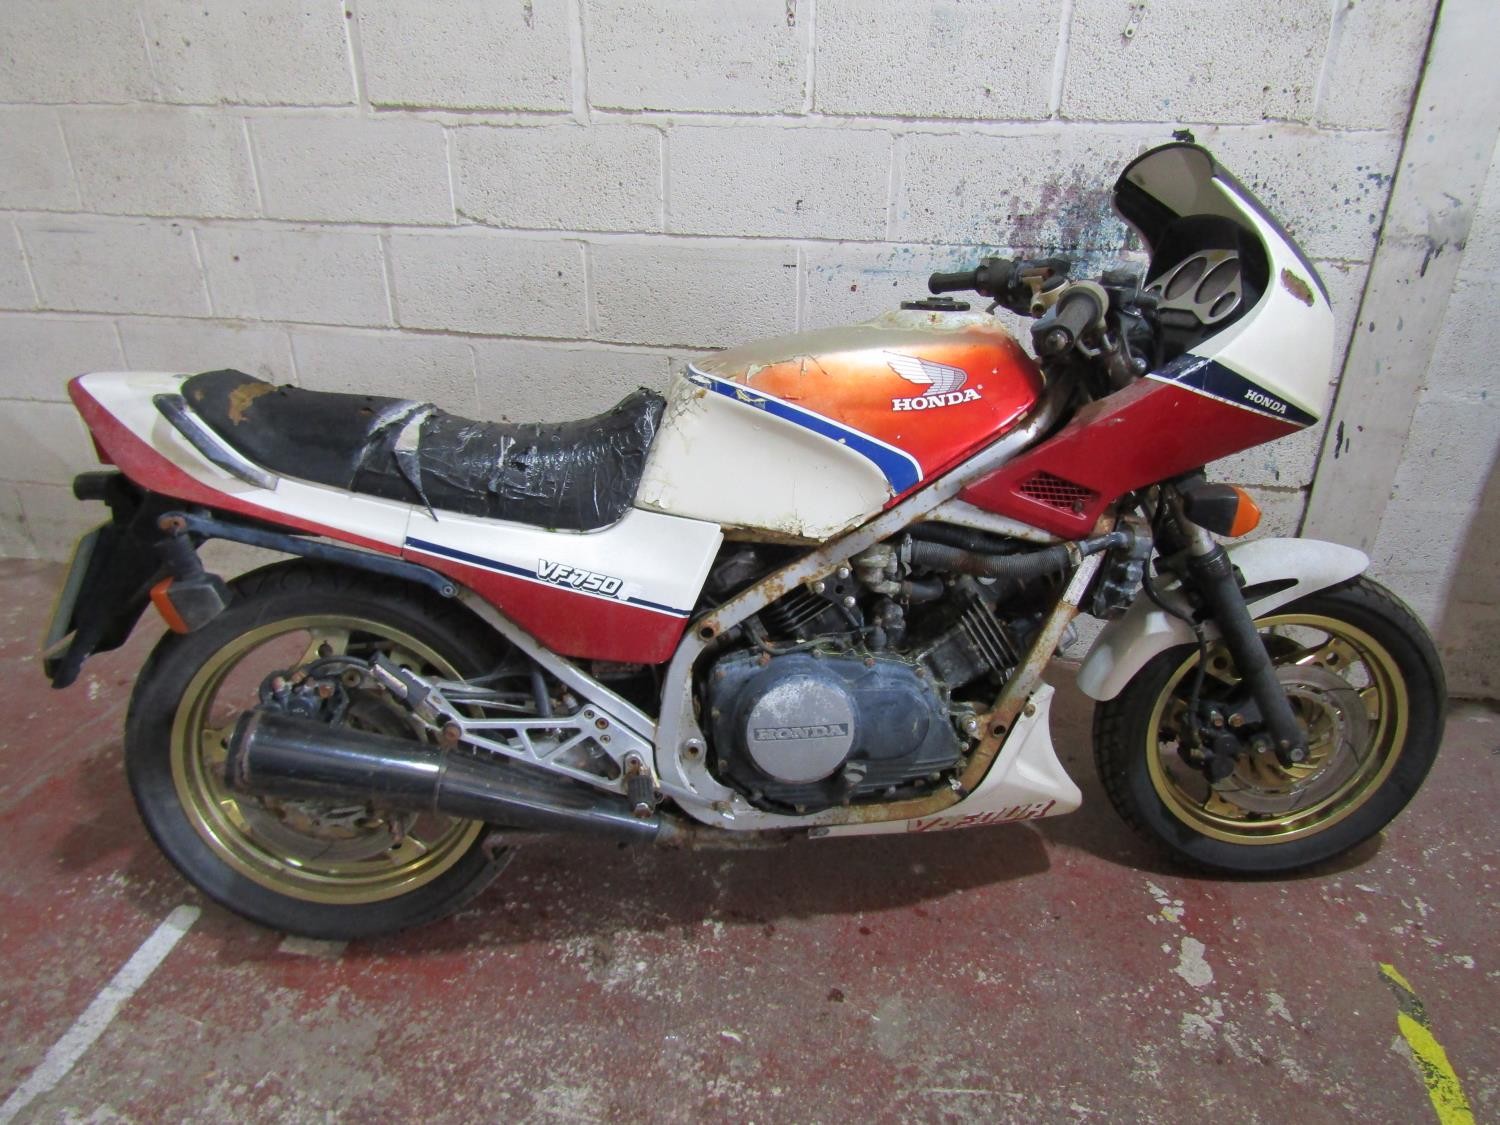 A Honda VF750 V-Twin motorcycle, registration number A25 TWA (no V5C logbook present) Sold without